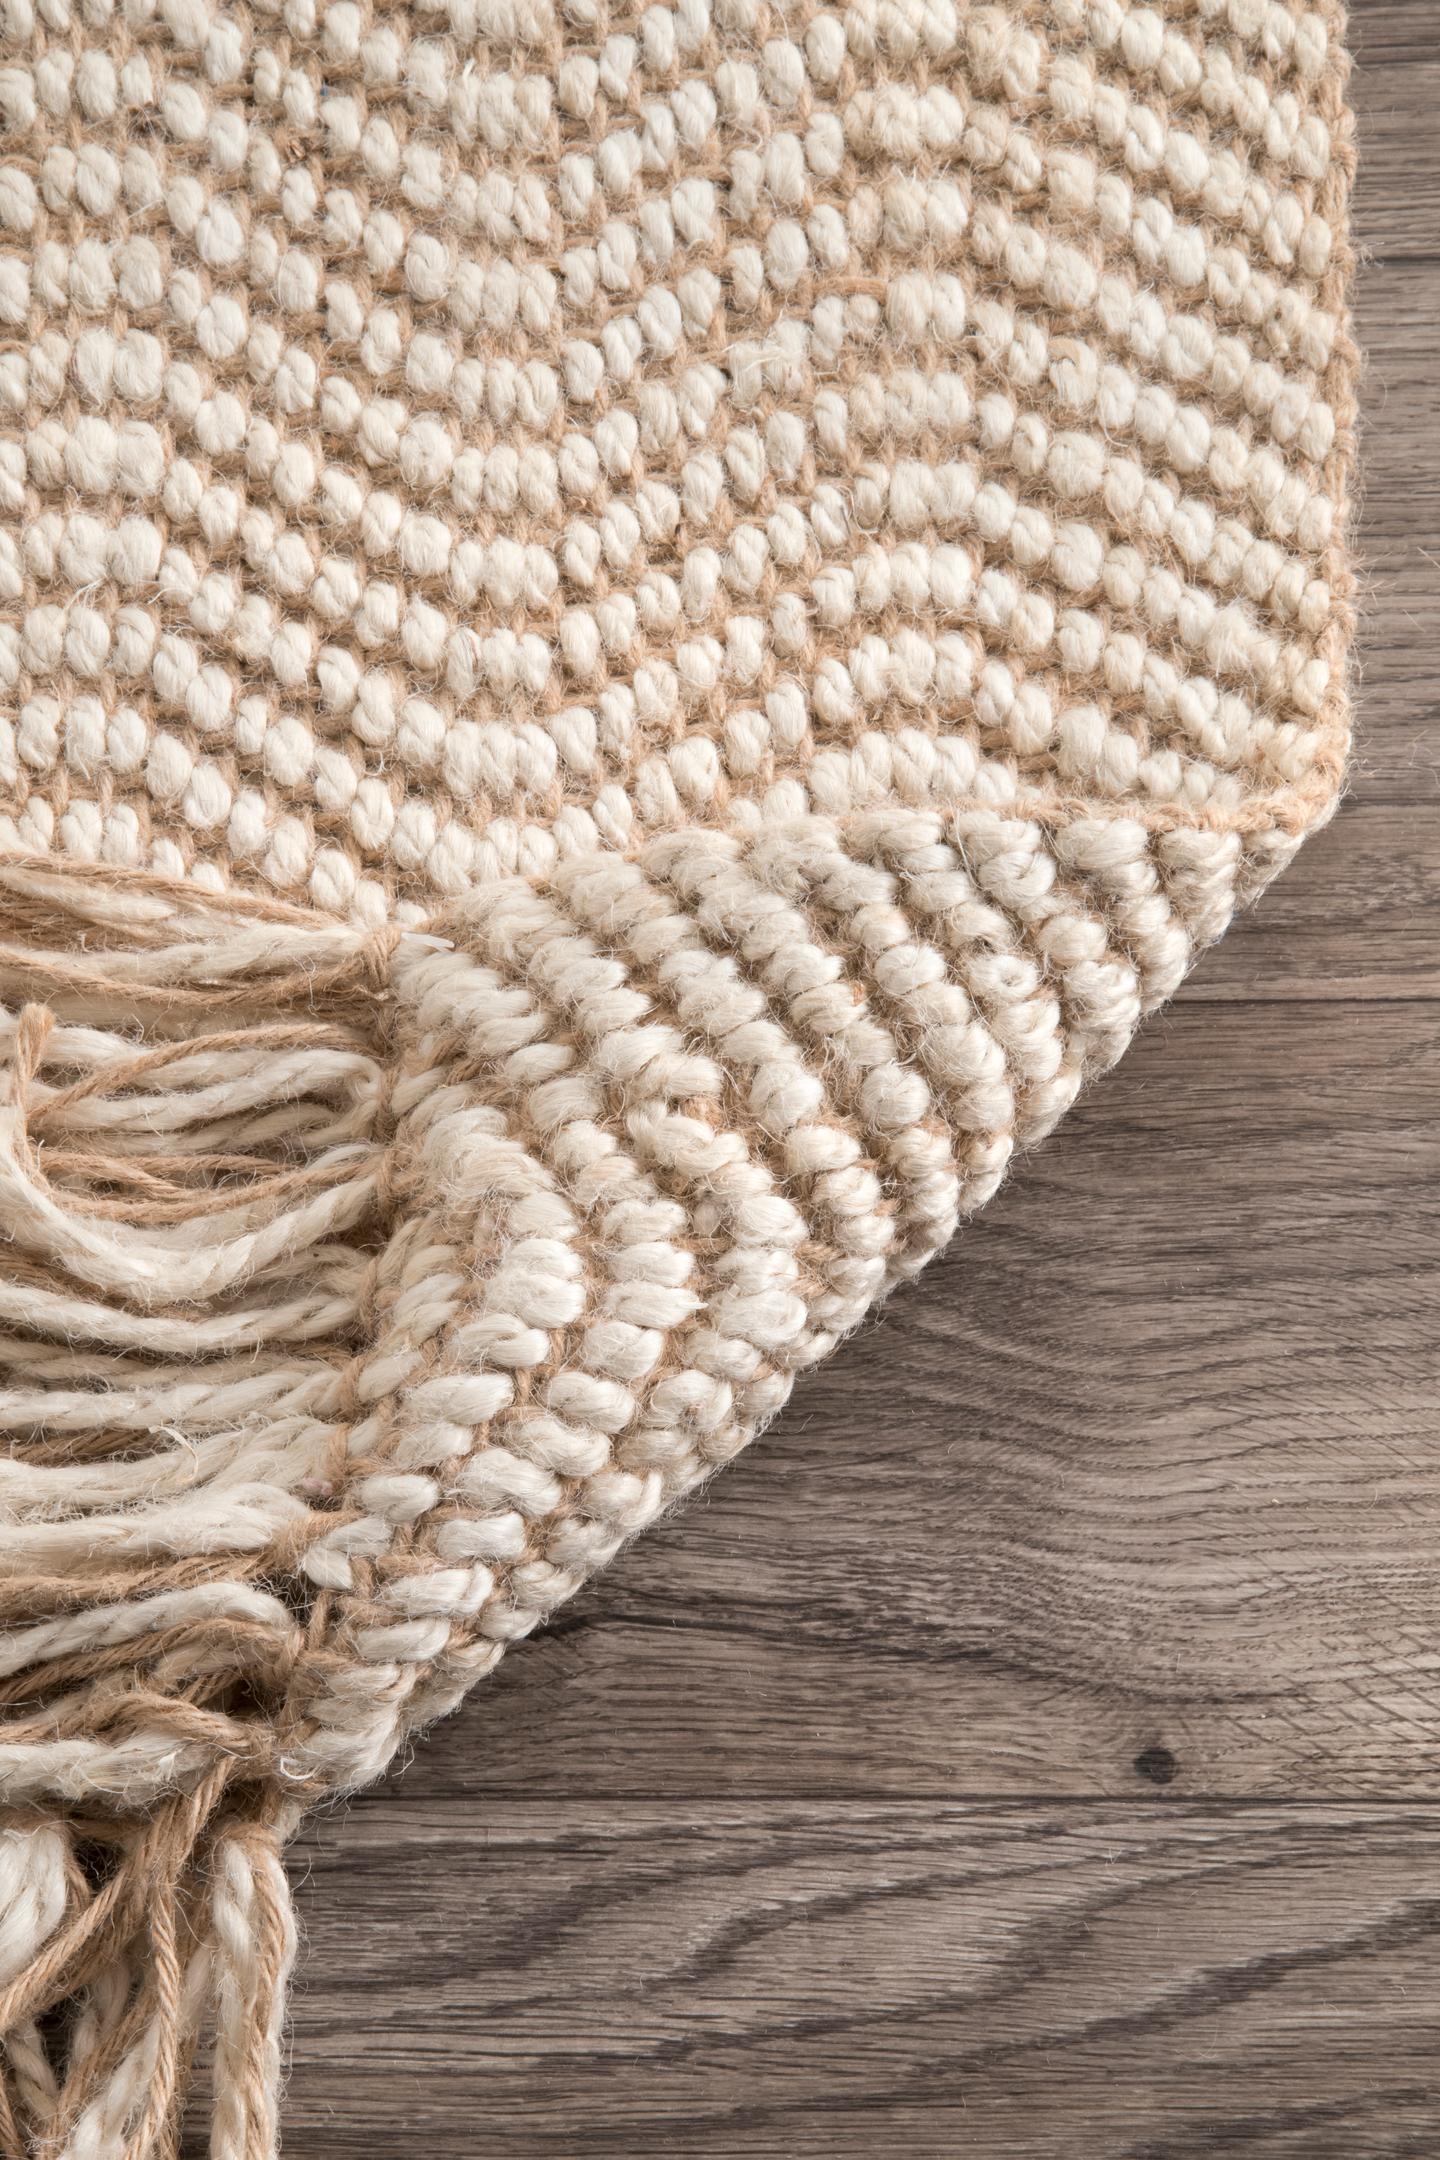  Hand Woven Don Jute with fringe Area Rug - Image 3